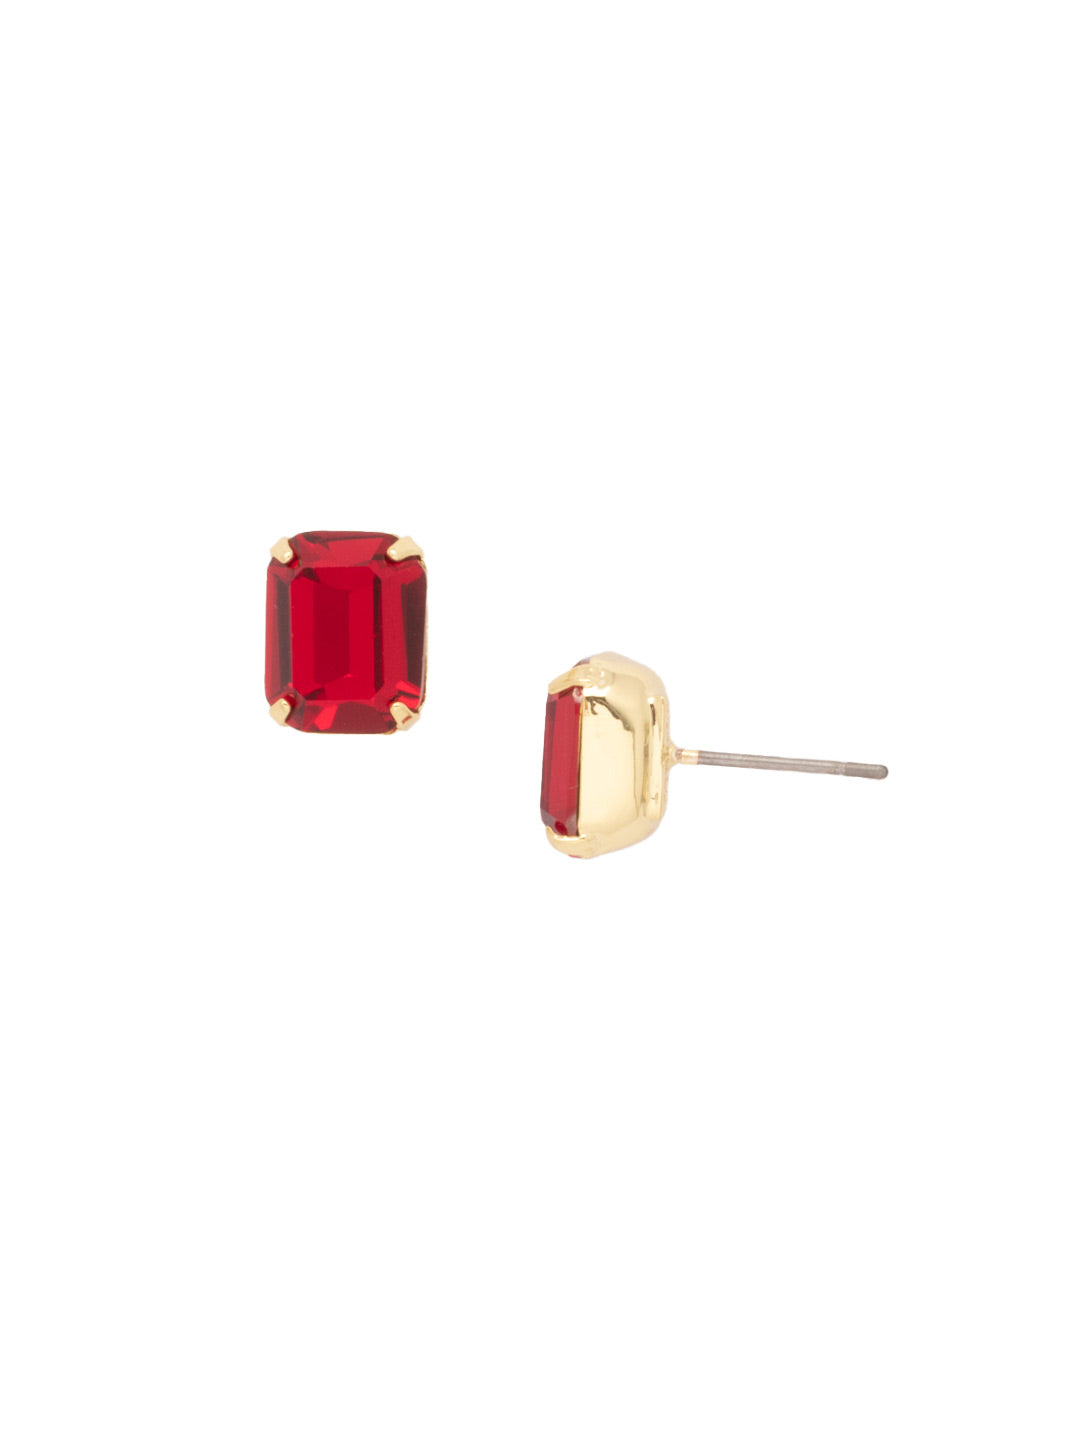 Octavia Stud Earrings - EDU53BGFIS - <p>These rounded emerald cut stud earrings can be worn alone or paired with anything for just a bit of extra bling! From Sorrelli's Fireside collection in our Bright Gold-tone finish.</p>